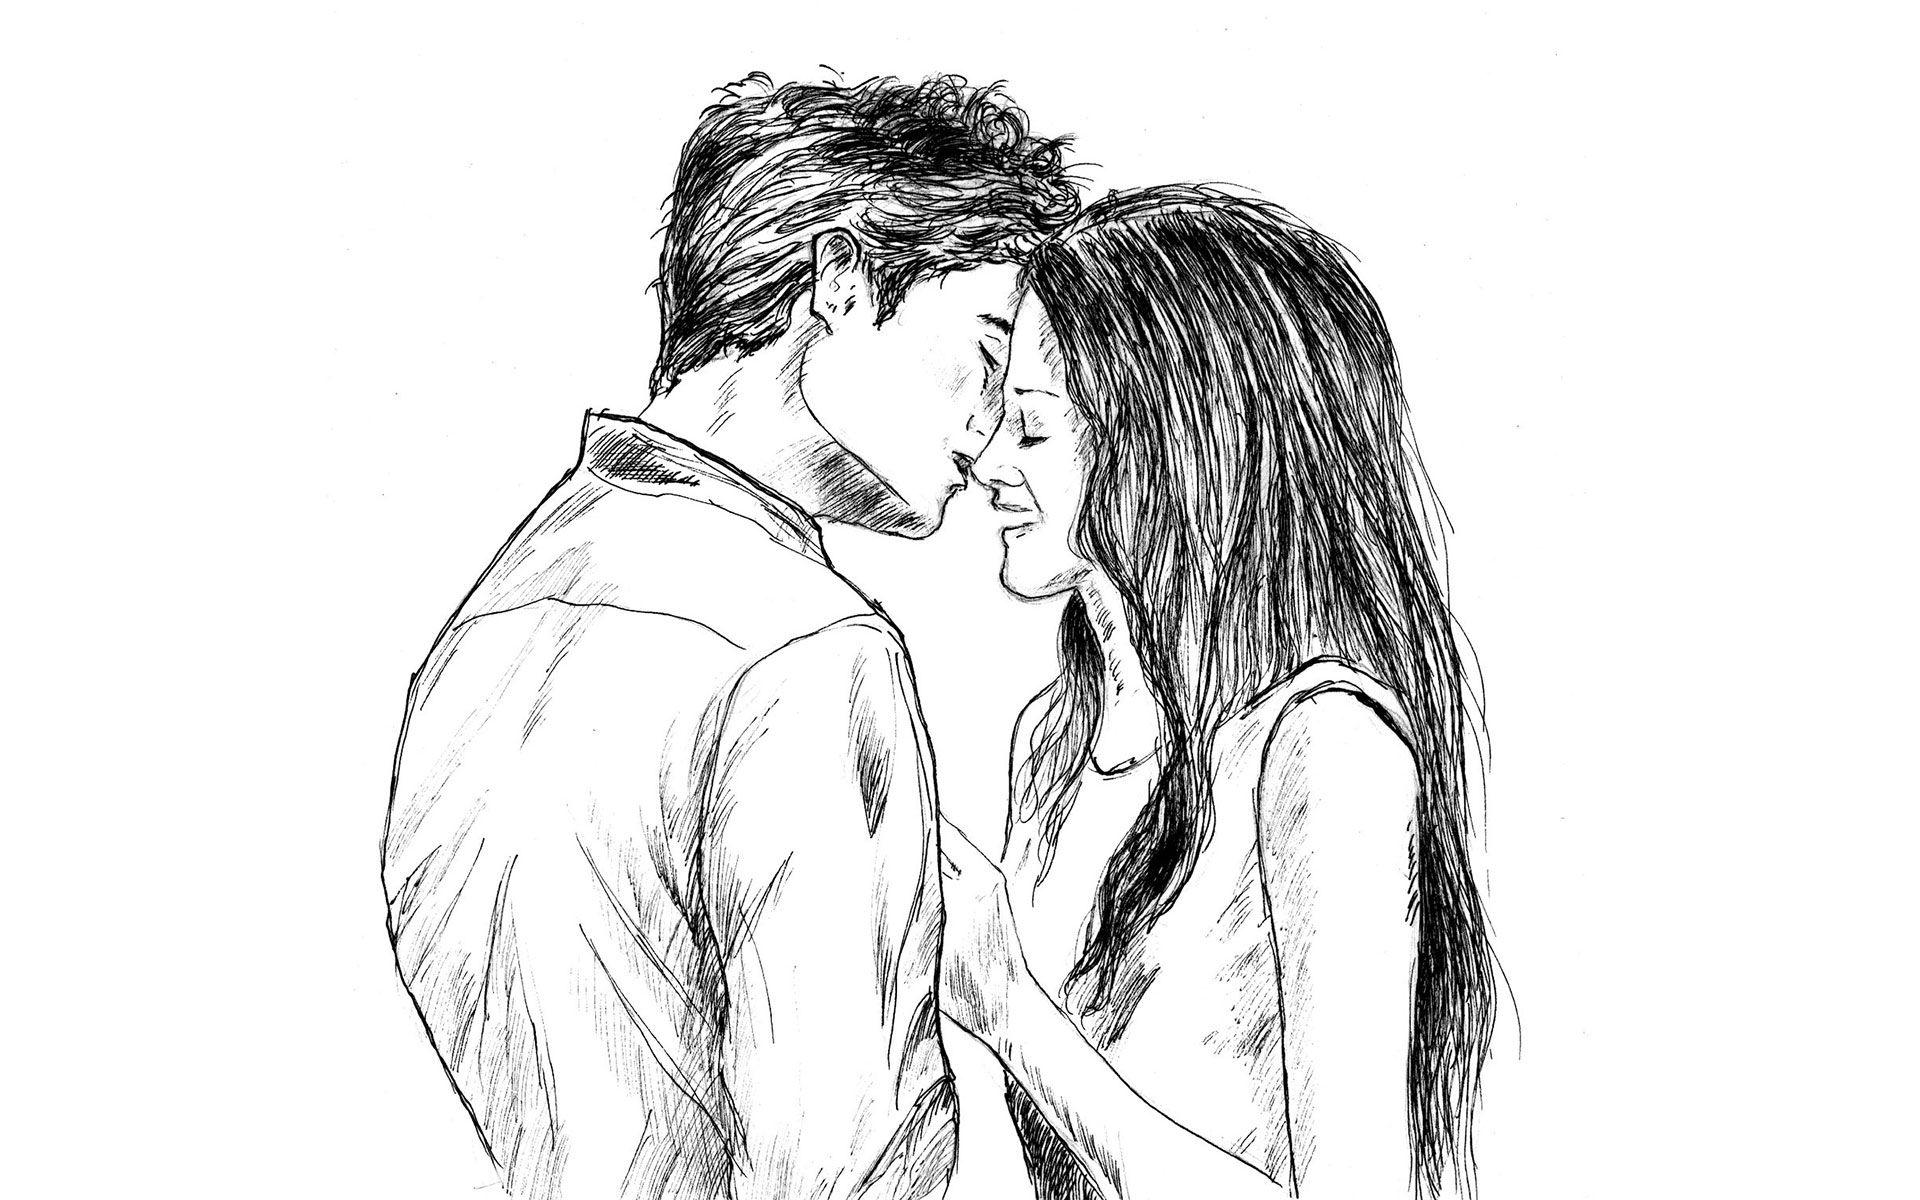 35+ Trends For Cute Love Wallpaper Cave Cute Love Pencil Drawing Images
Wallpaper